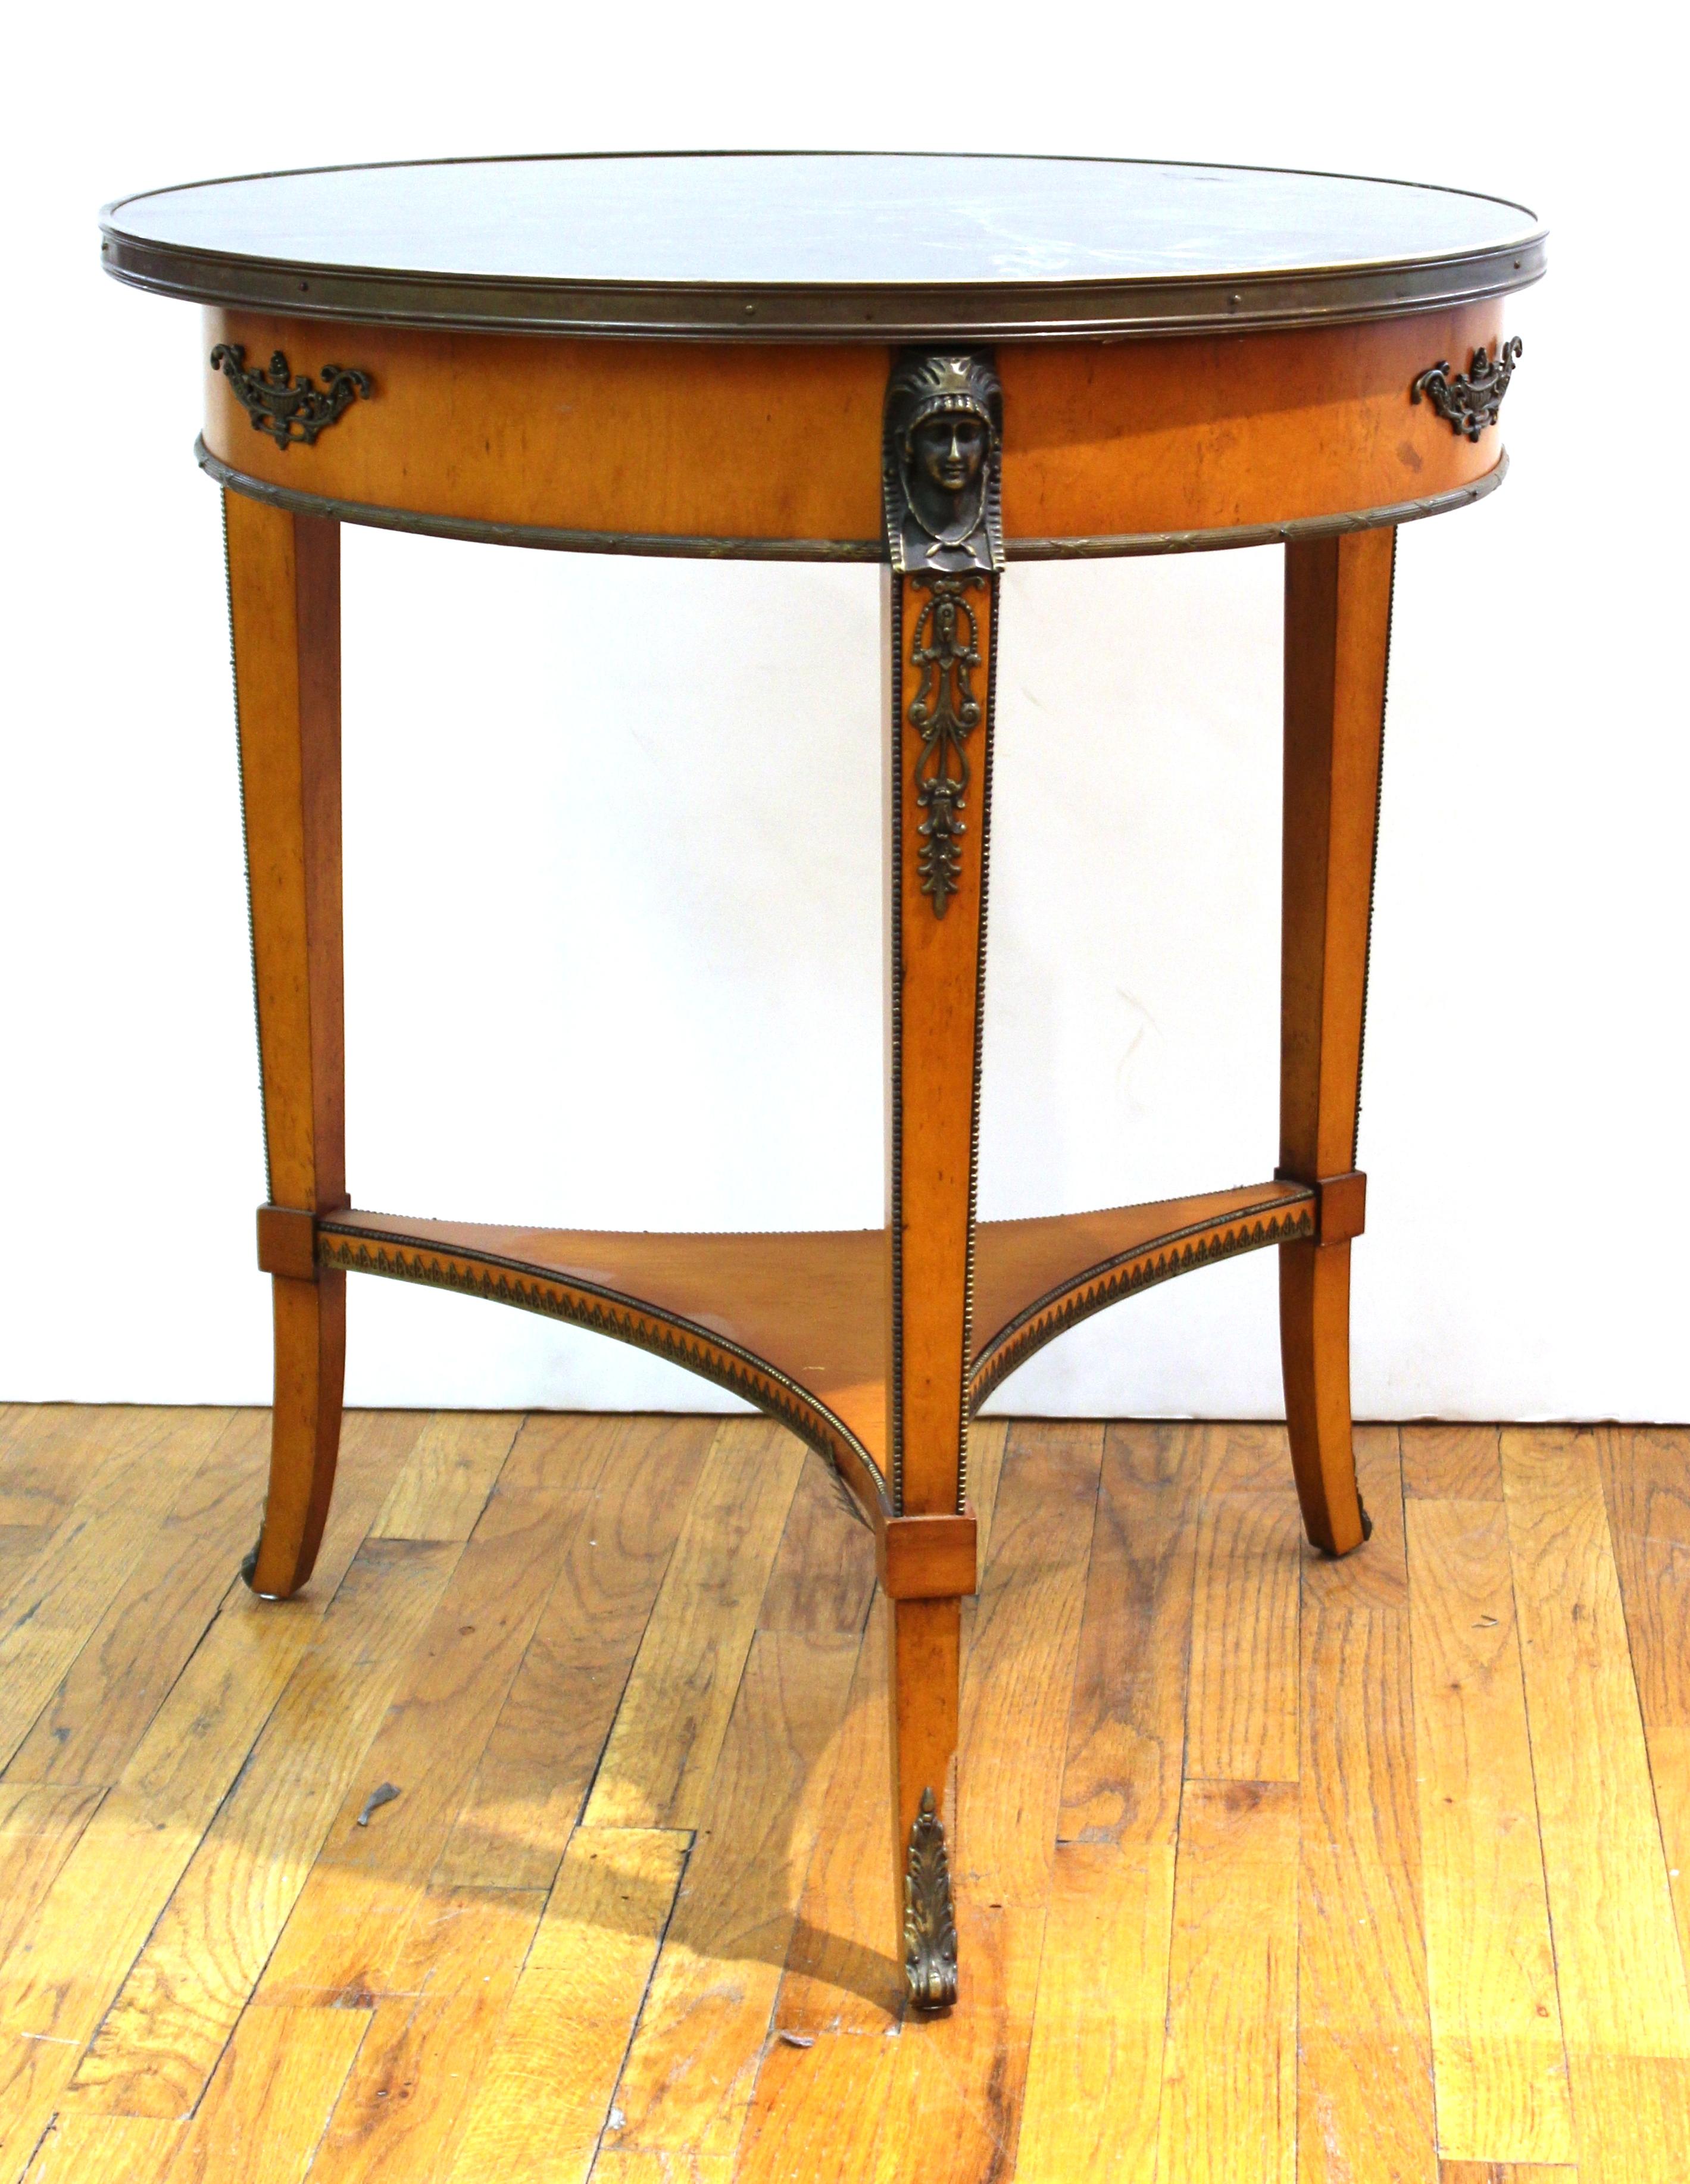 Empire style wood and marble gueridon table by John Widdicomb. The piece was made in the 20th century and comes with a green marble top. Makers mark on the bottom. In great vintage condition with age-appropriate wear and use.